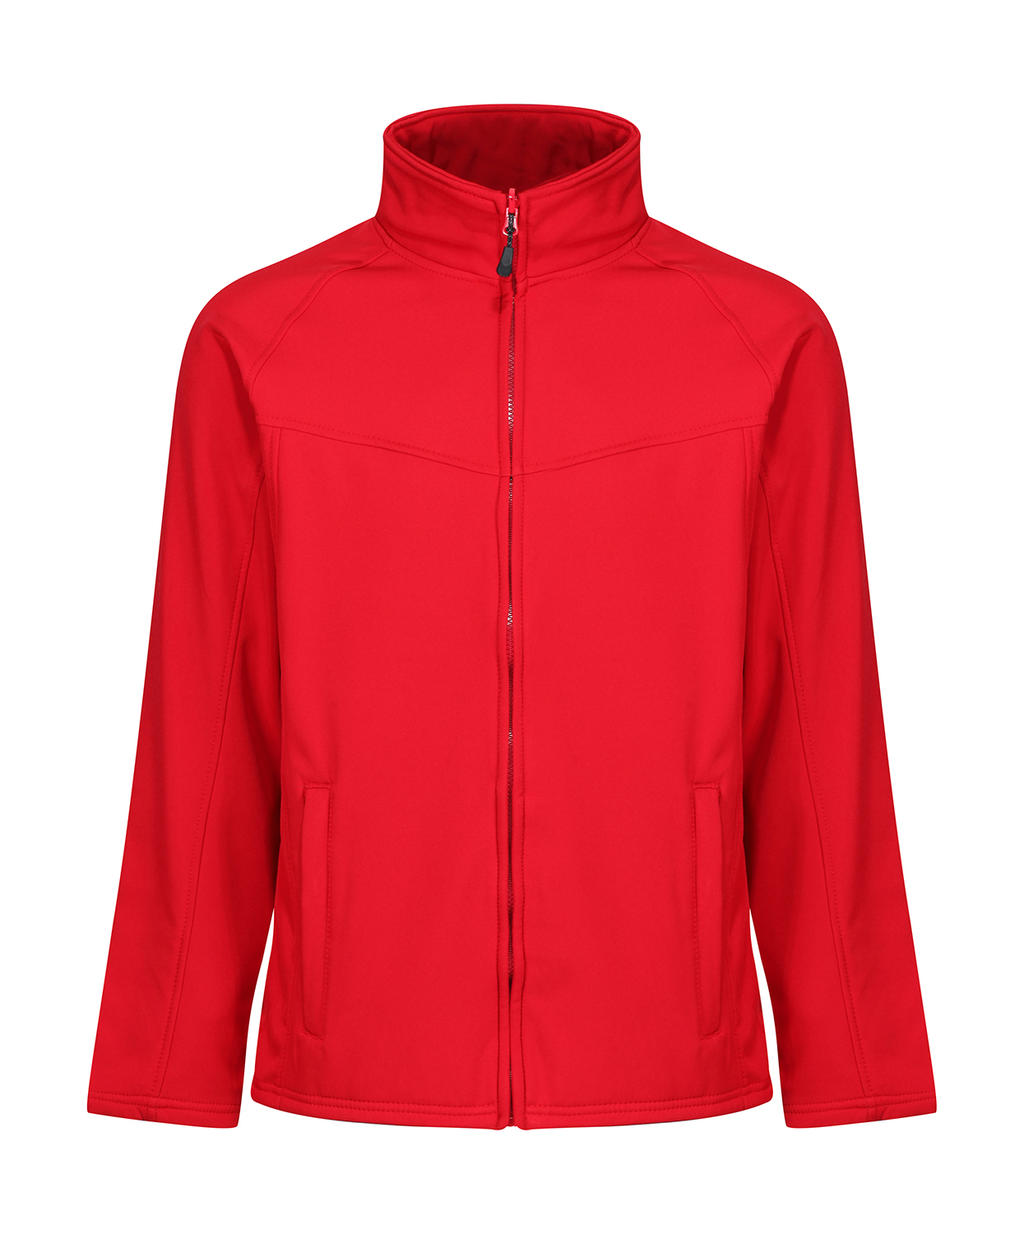  Uproar Softshell Jacket in Farbe Classic Red/Seal Grey